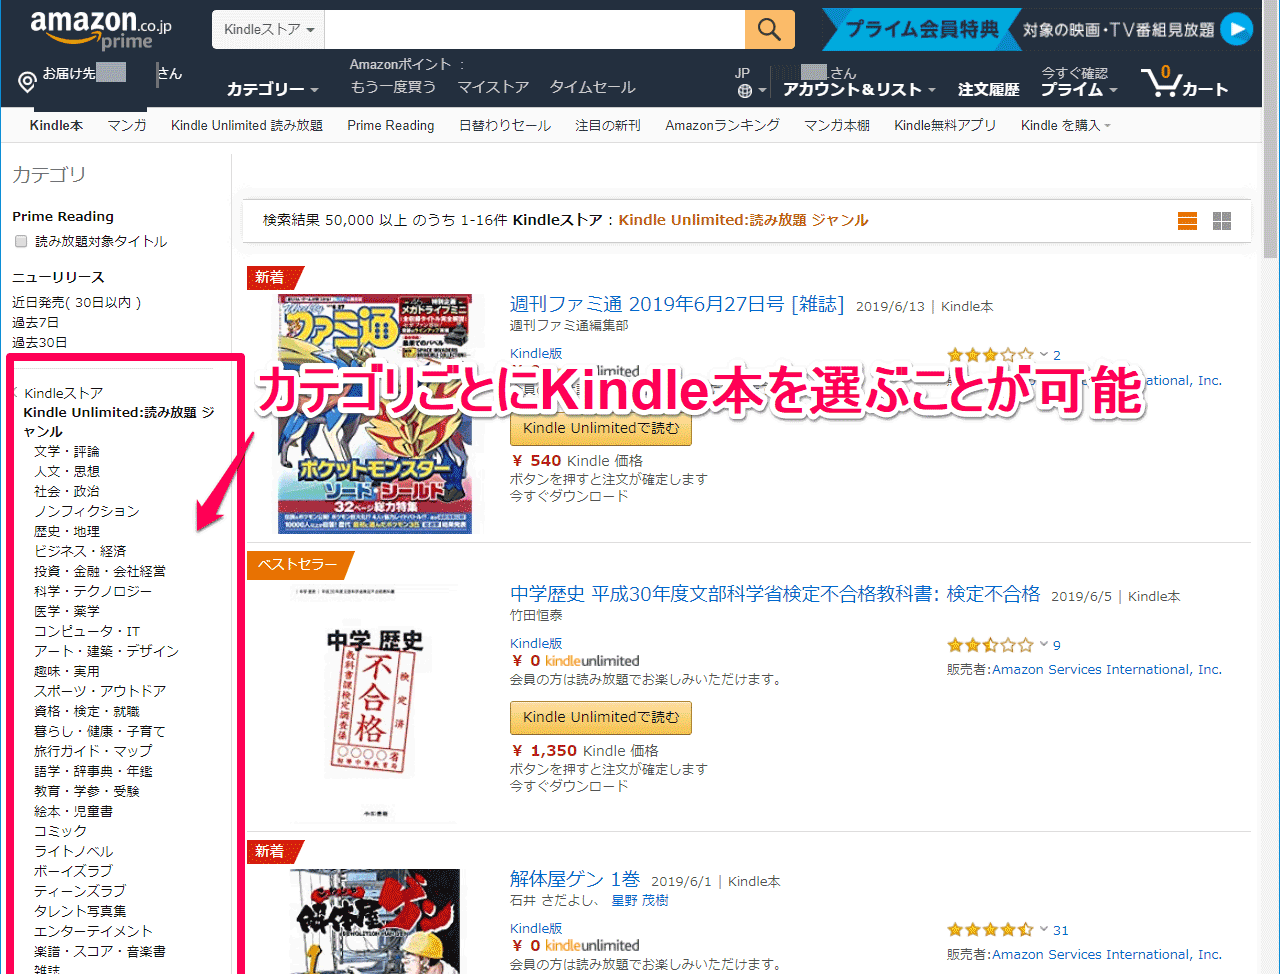 Kindle Unlimited ジャンル別ページ